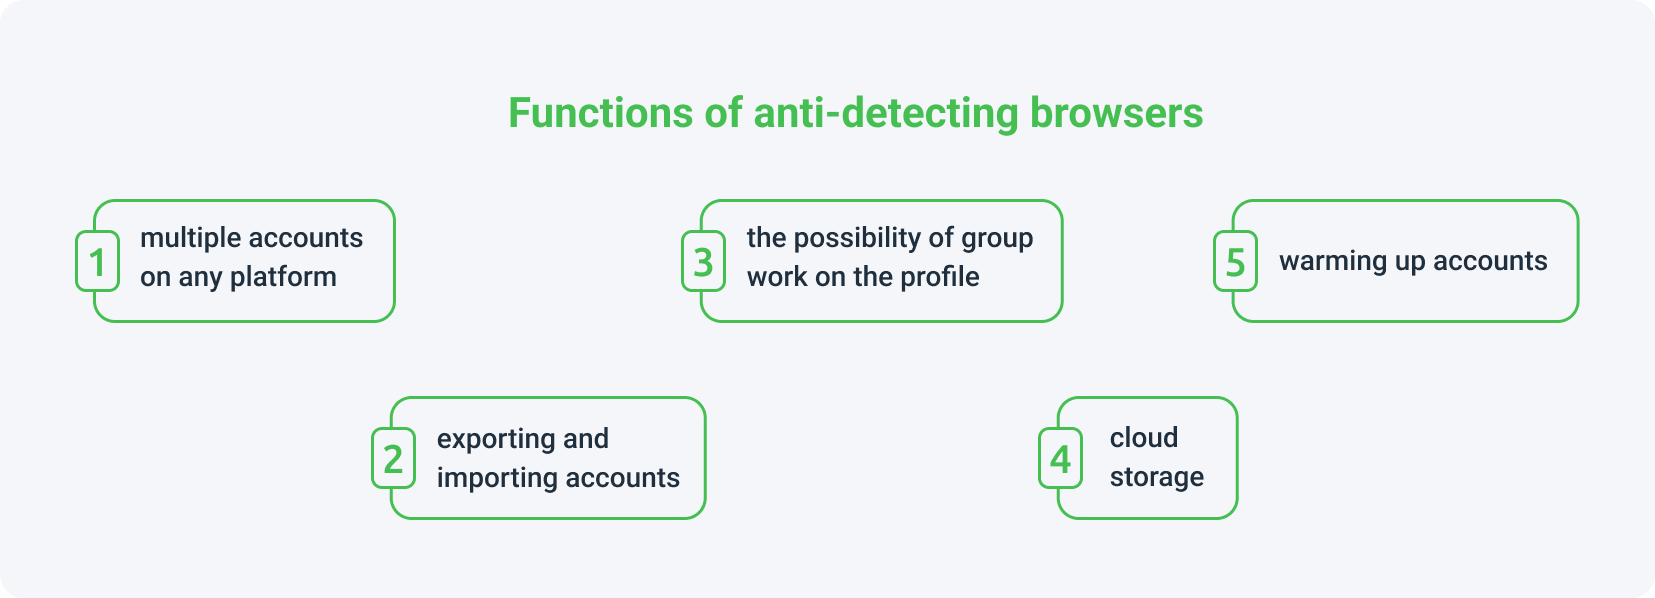 What features do anti-detection browsers have?